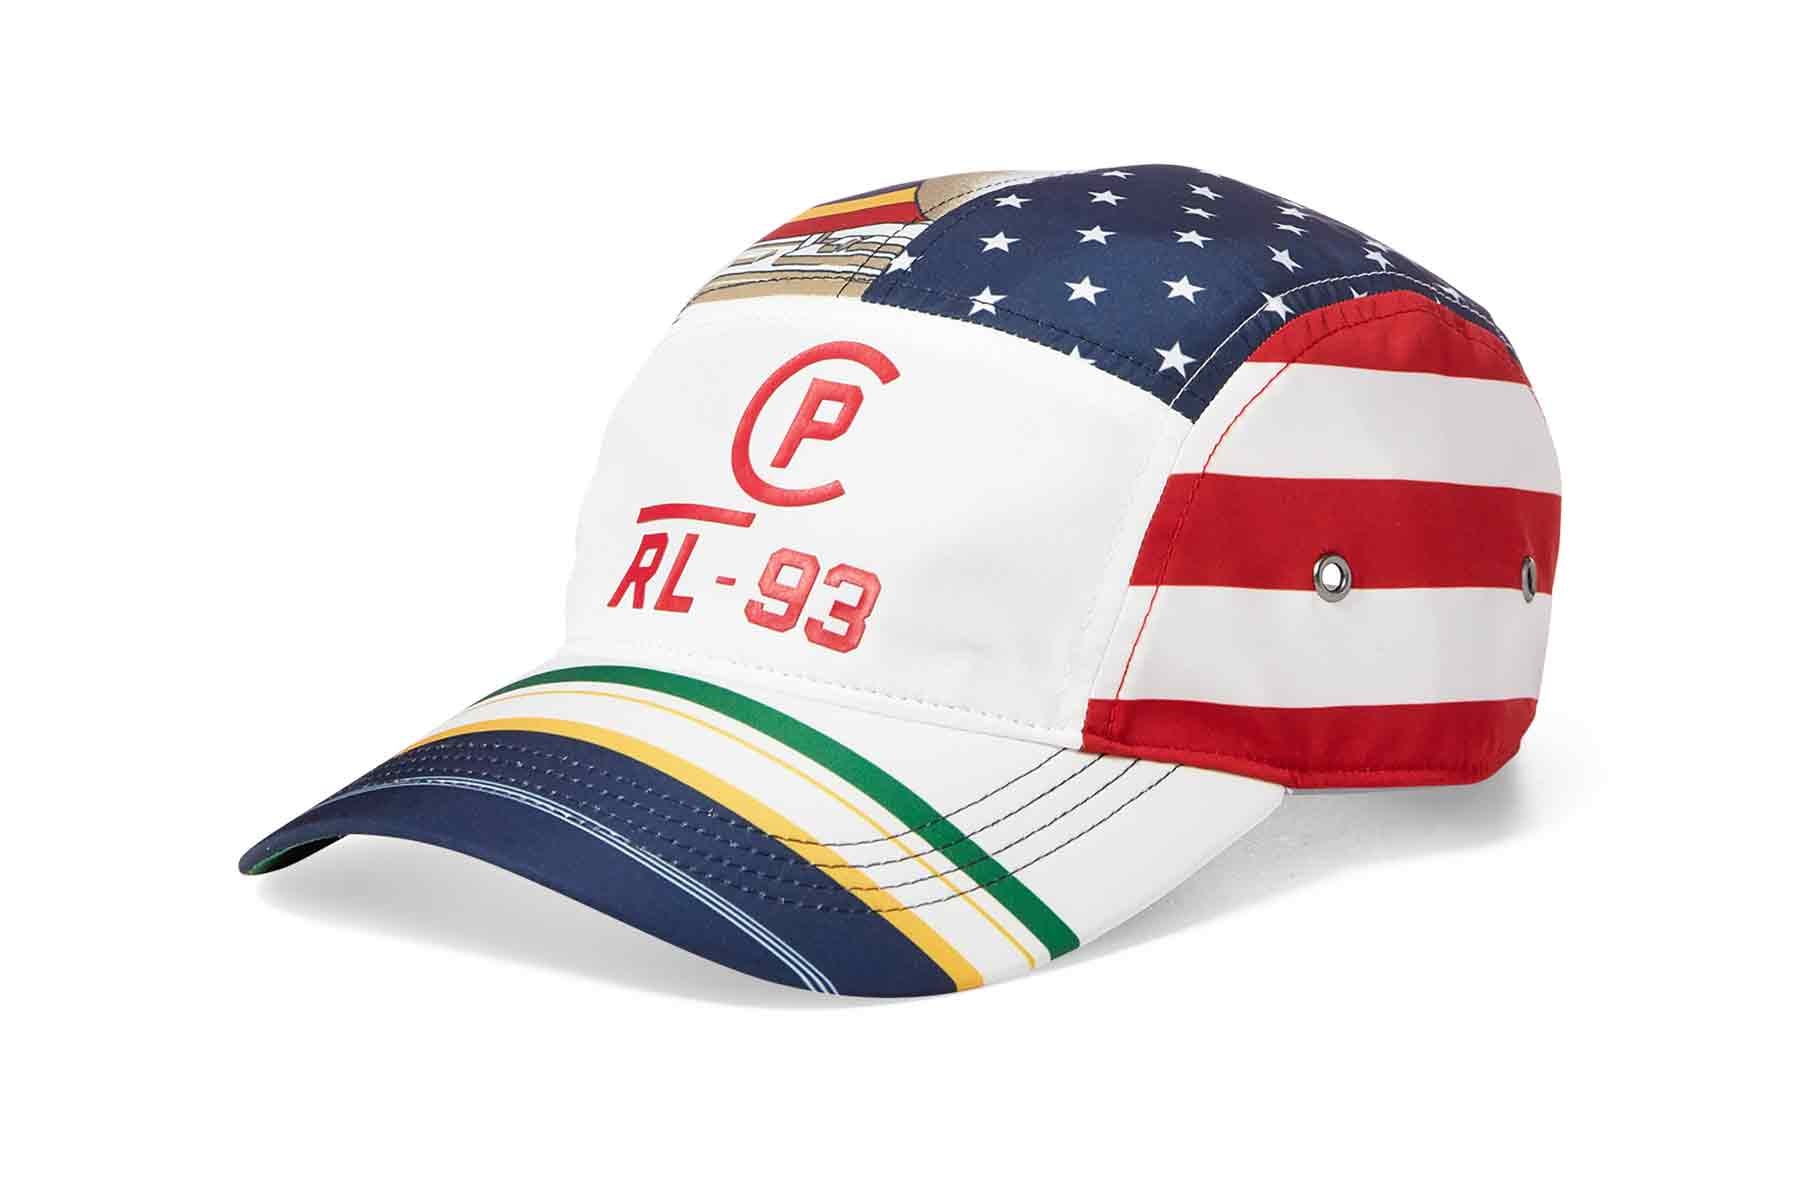 Polo by Ralph Lauren CP-93 Collection 2018 limited edition America’s Cup sailing nautical reissues